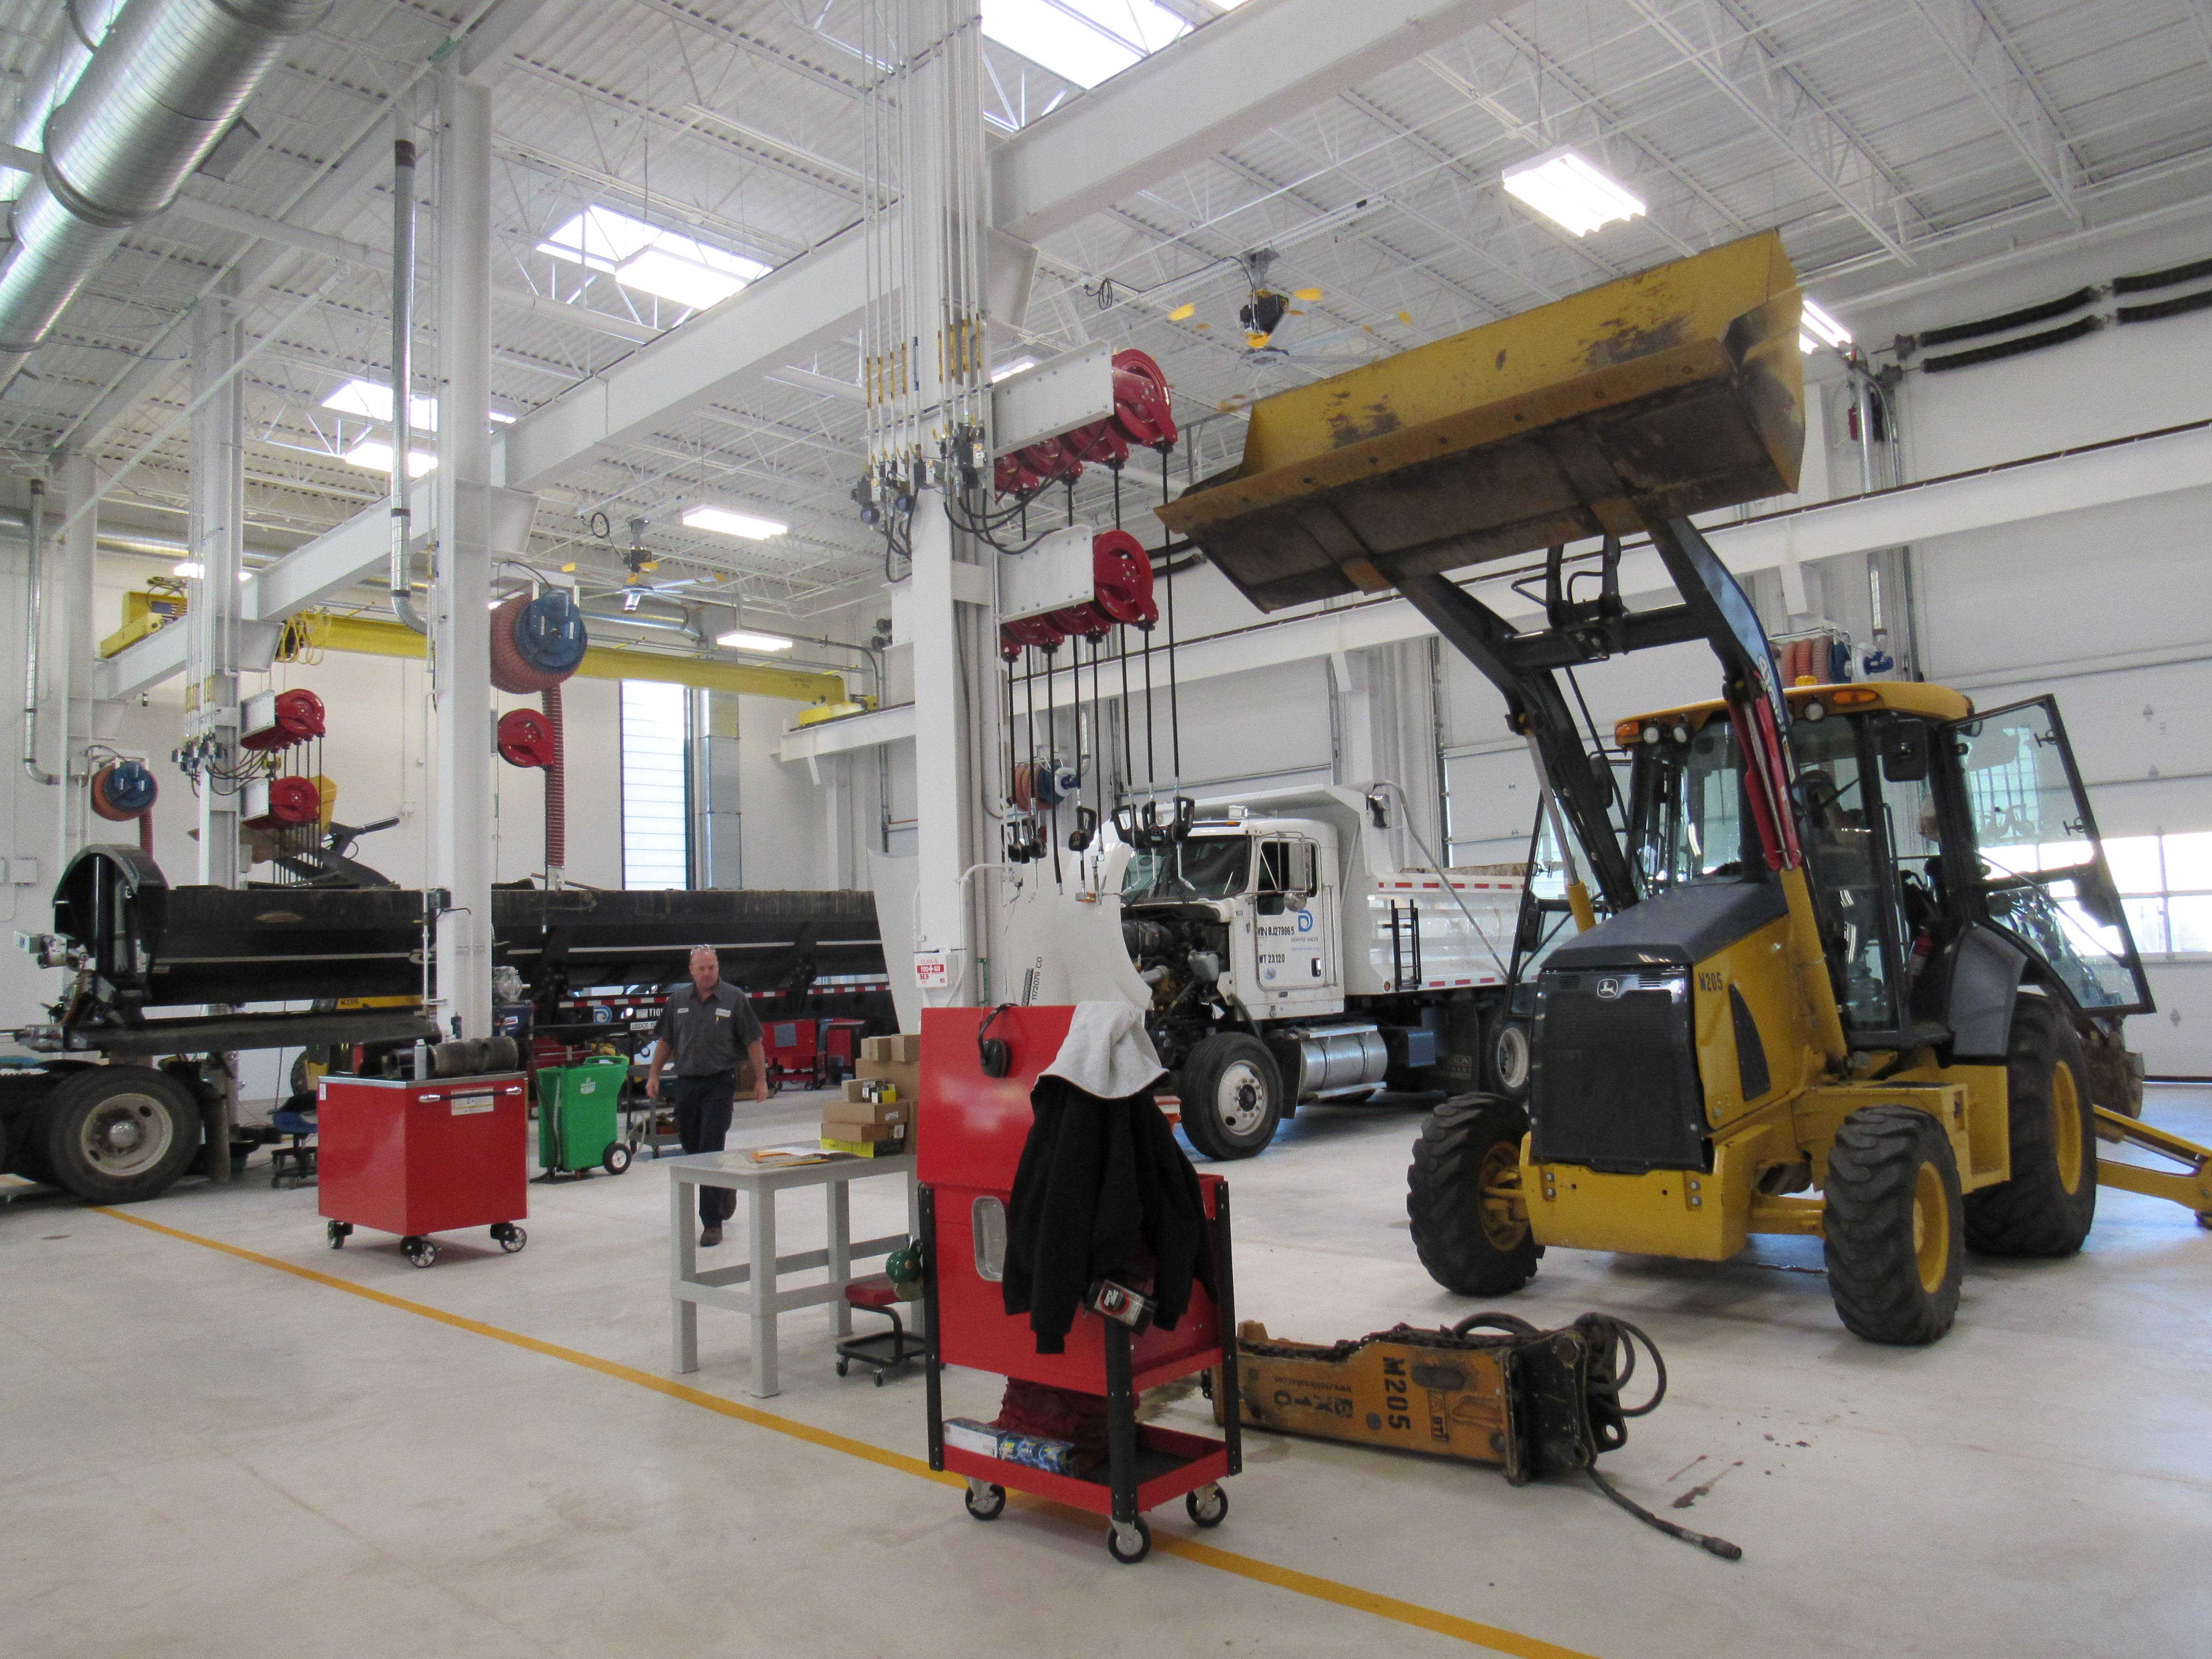 Mechanics in the new Fleet Services building now work on a variety of vehicles rather than specializing in a few. Photo credit: Denver Water.